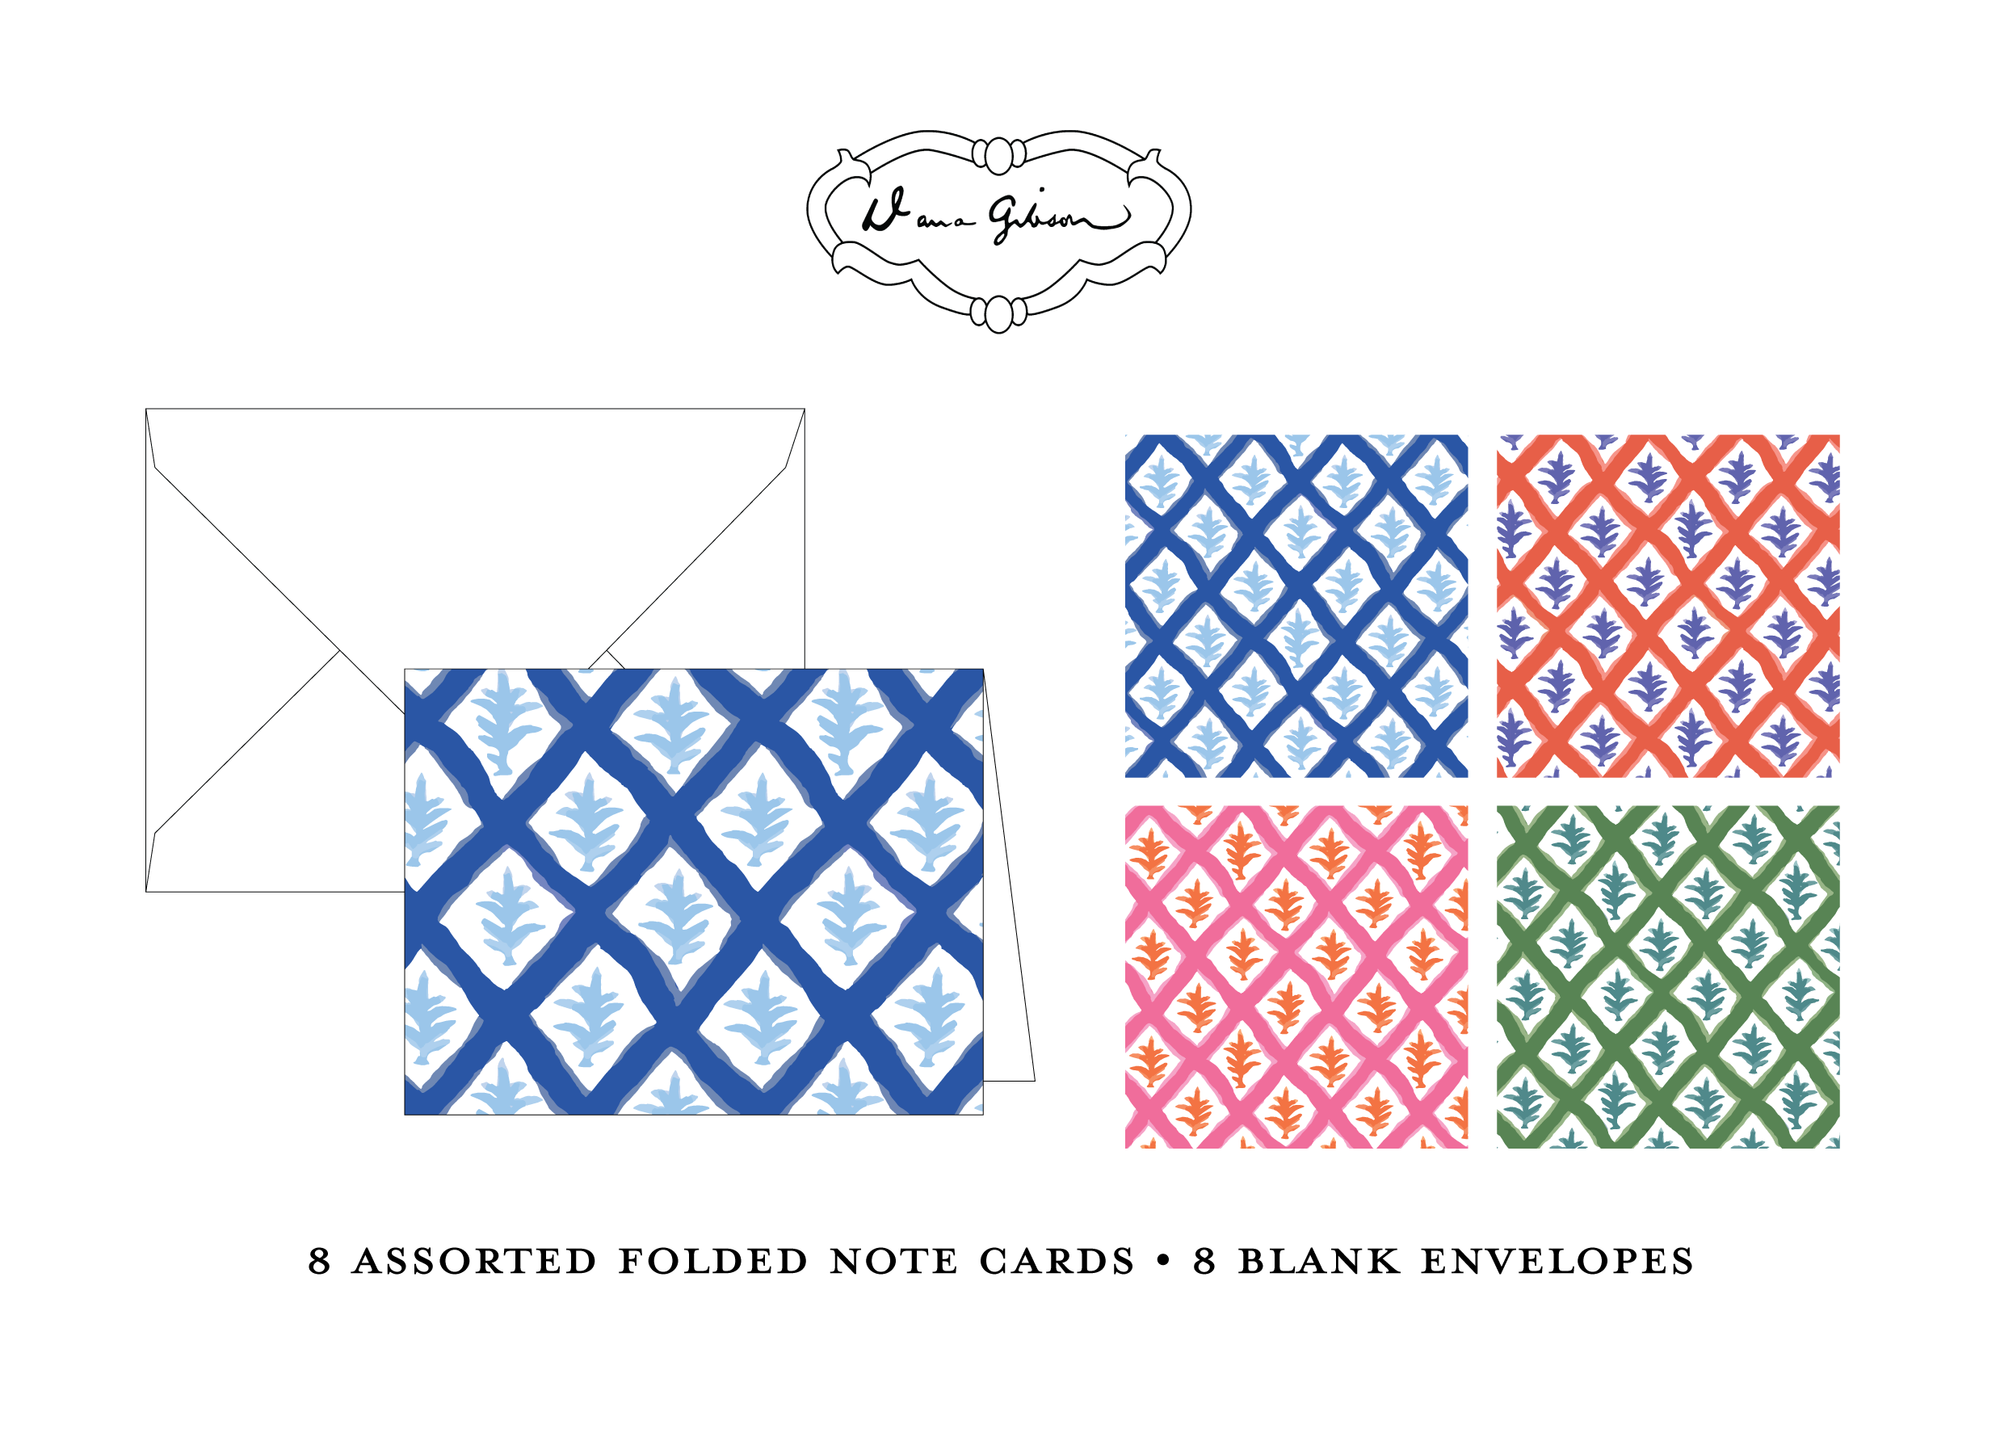 Casa Assorted Folded Notes by Dana Gibson